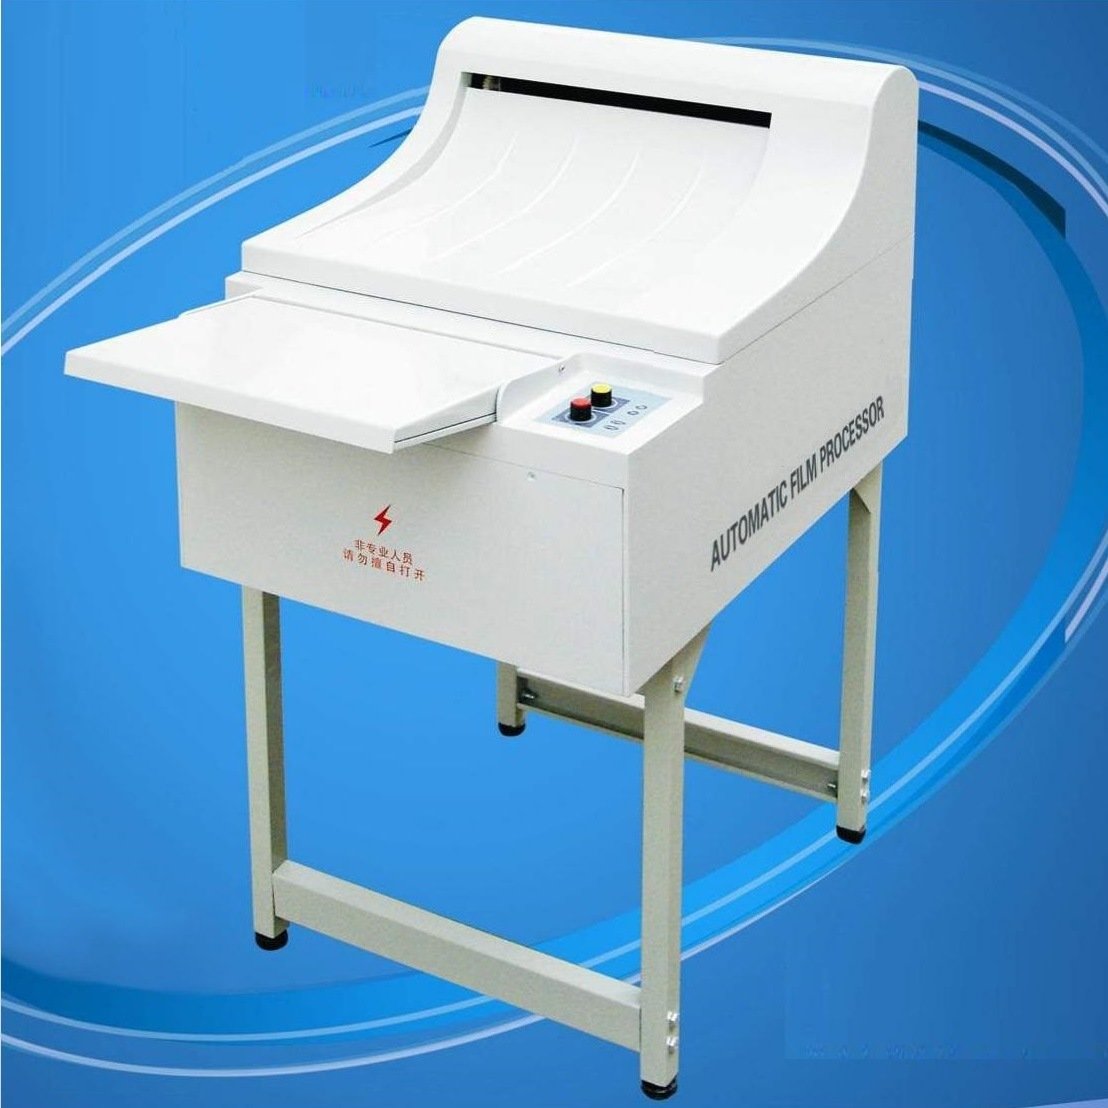 HXP-T Medical Equipment Automatic X-ray Film Processor/Developer With China Factory Price